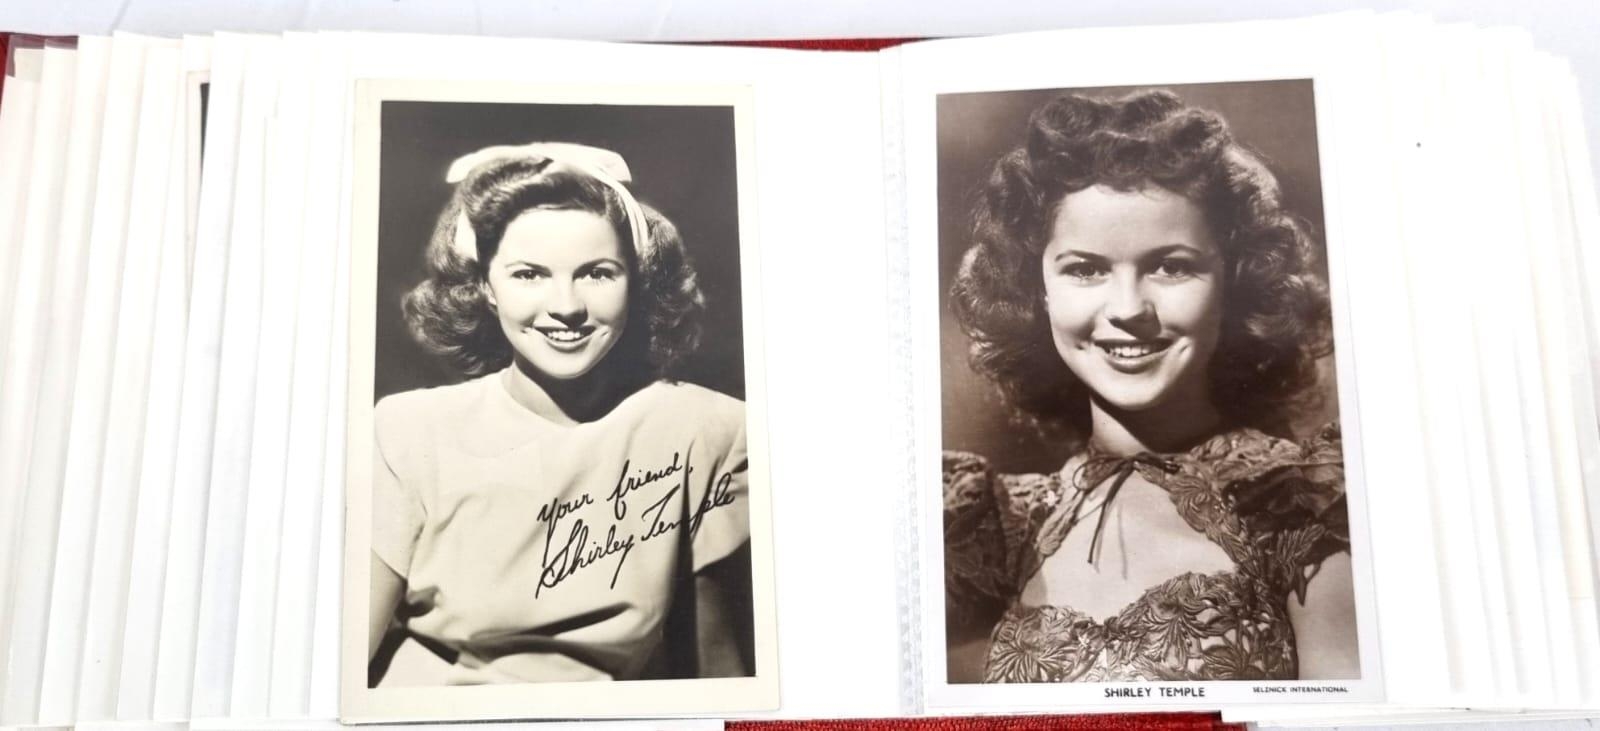 An Autograph Book Of Film Stars from the 1940s. Some are prints, some original - As found. - Image 7 of 11